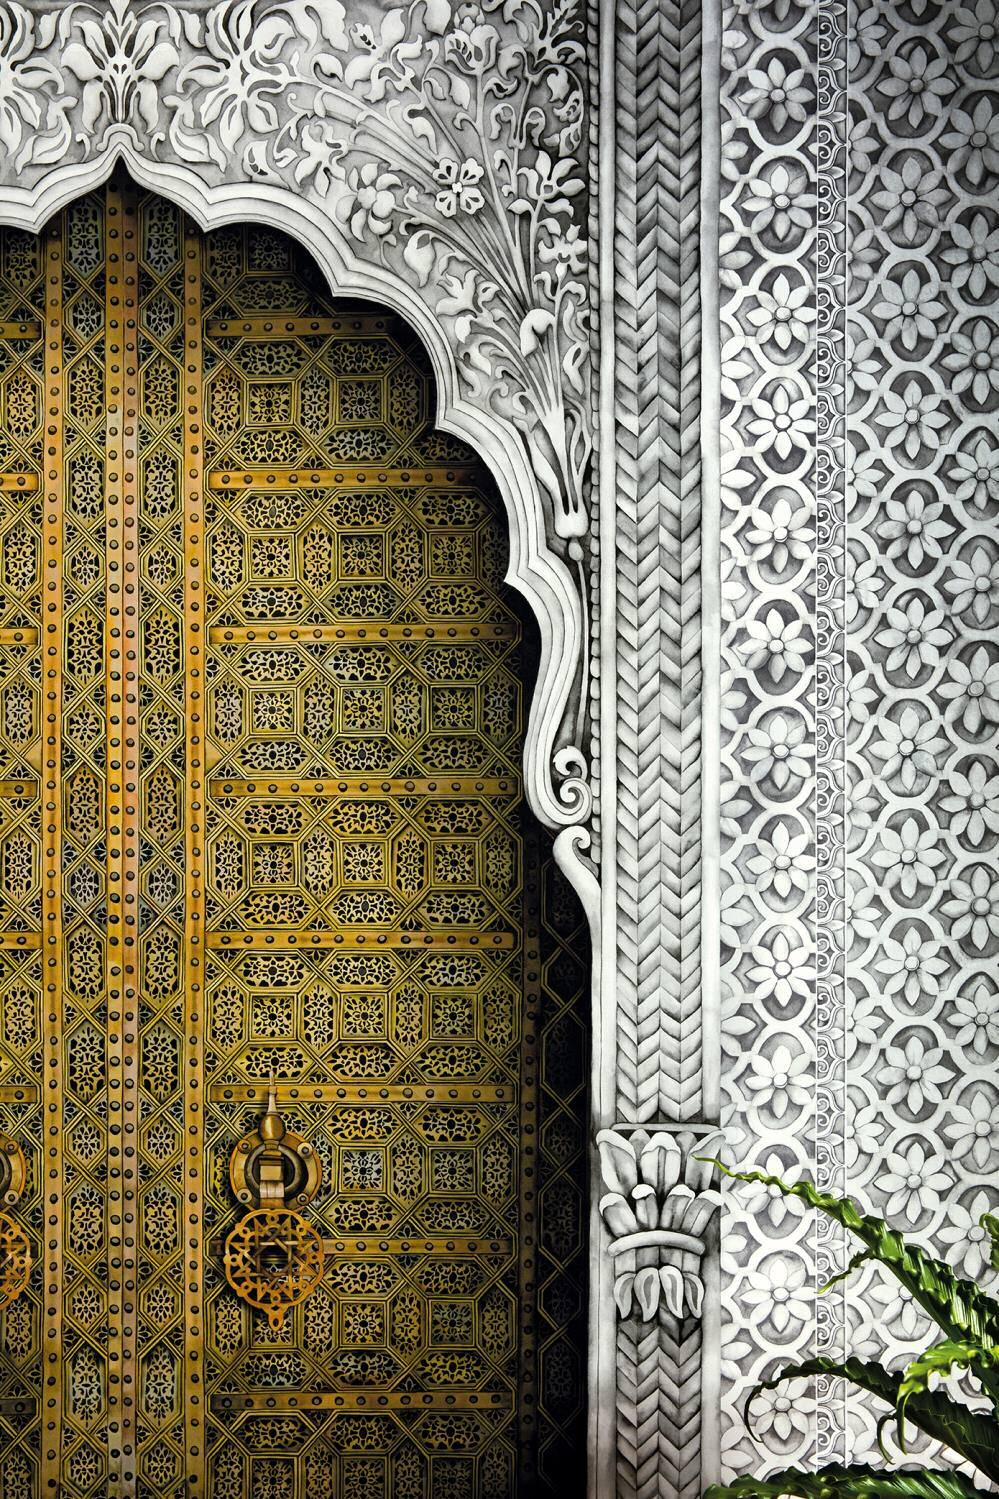 Its elegantly detailed Jali fretwork, elaborate, lacelike masonry and decorative motifs in Gold and Stone have been painstakingly drawn and painted by hand in order to reflect the highly-skilled